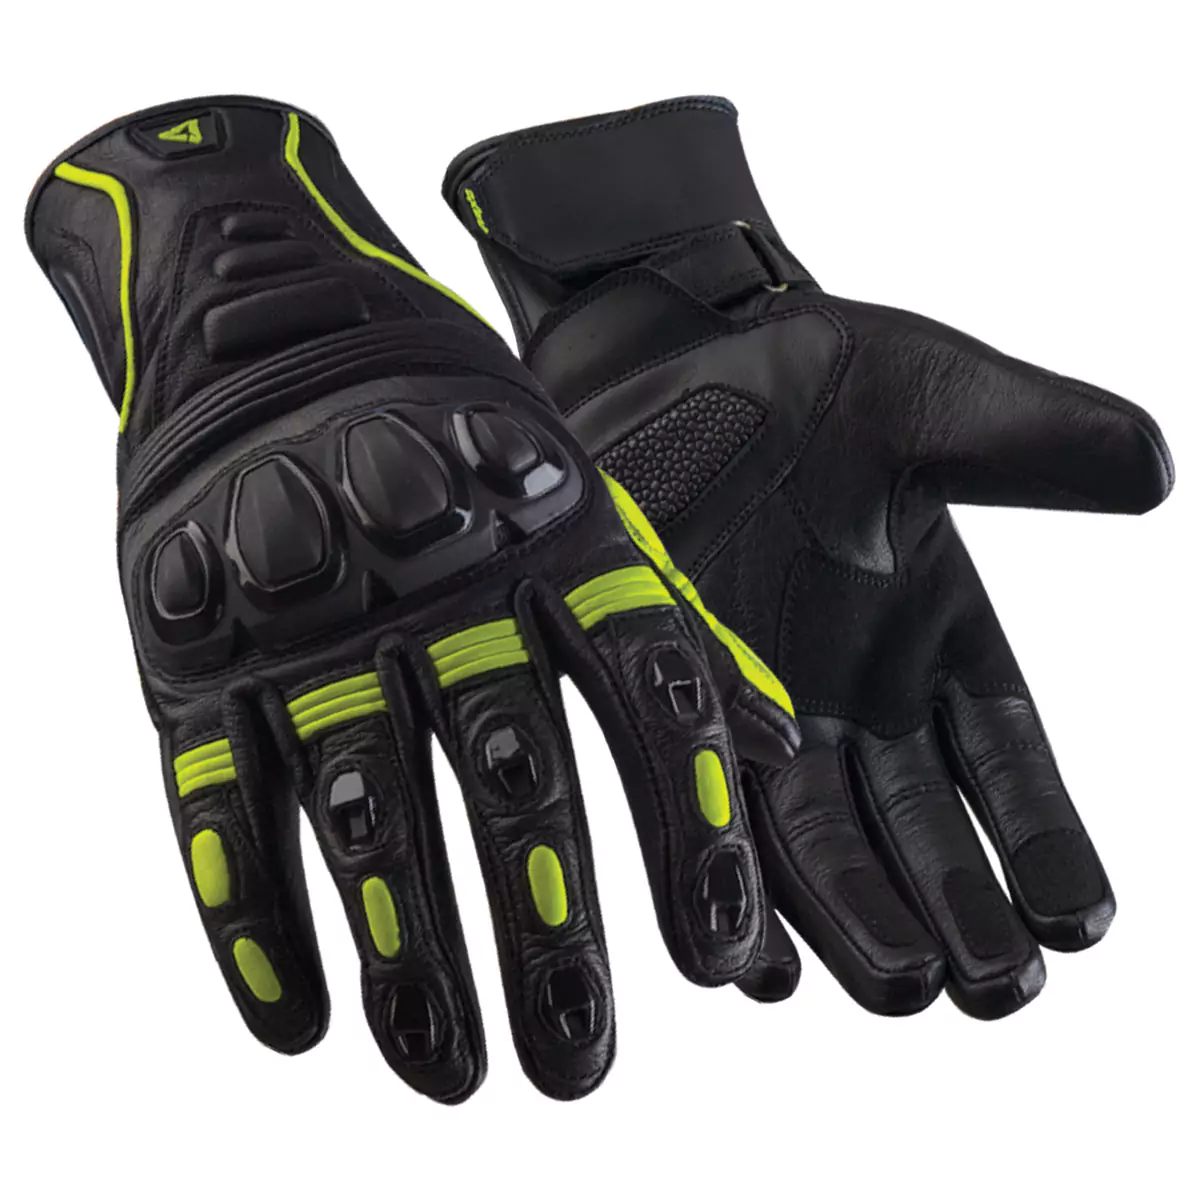 Pair of motorcycle racing gloves, featuring protective armor and knuckle guards.